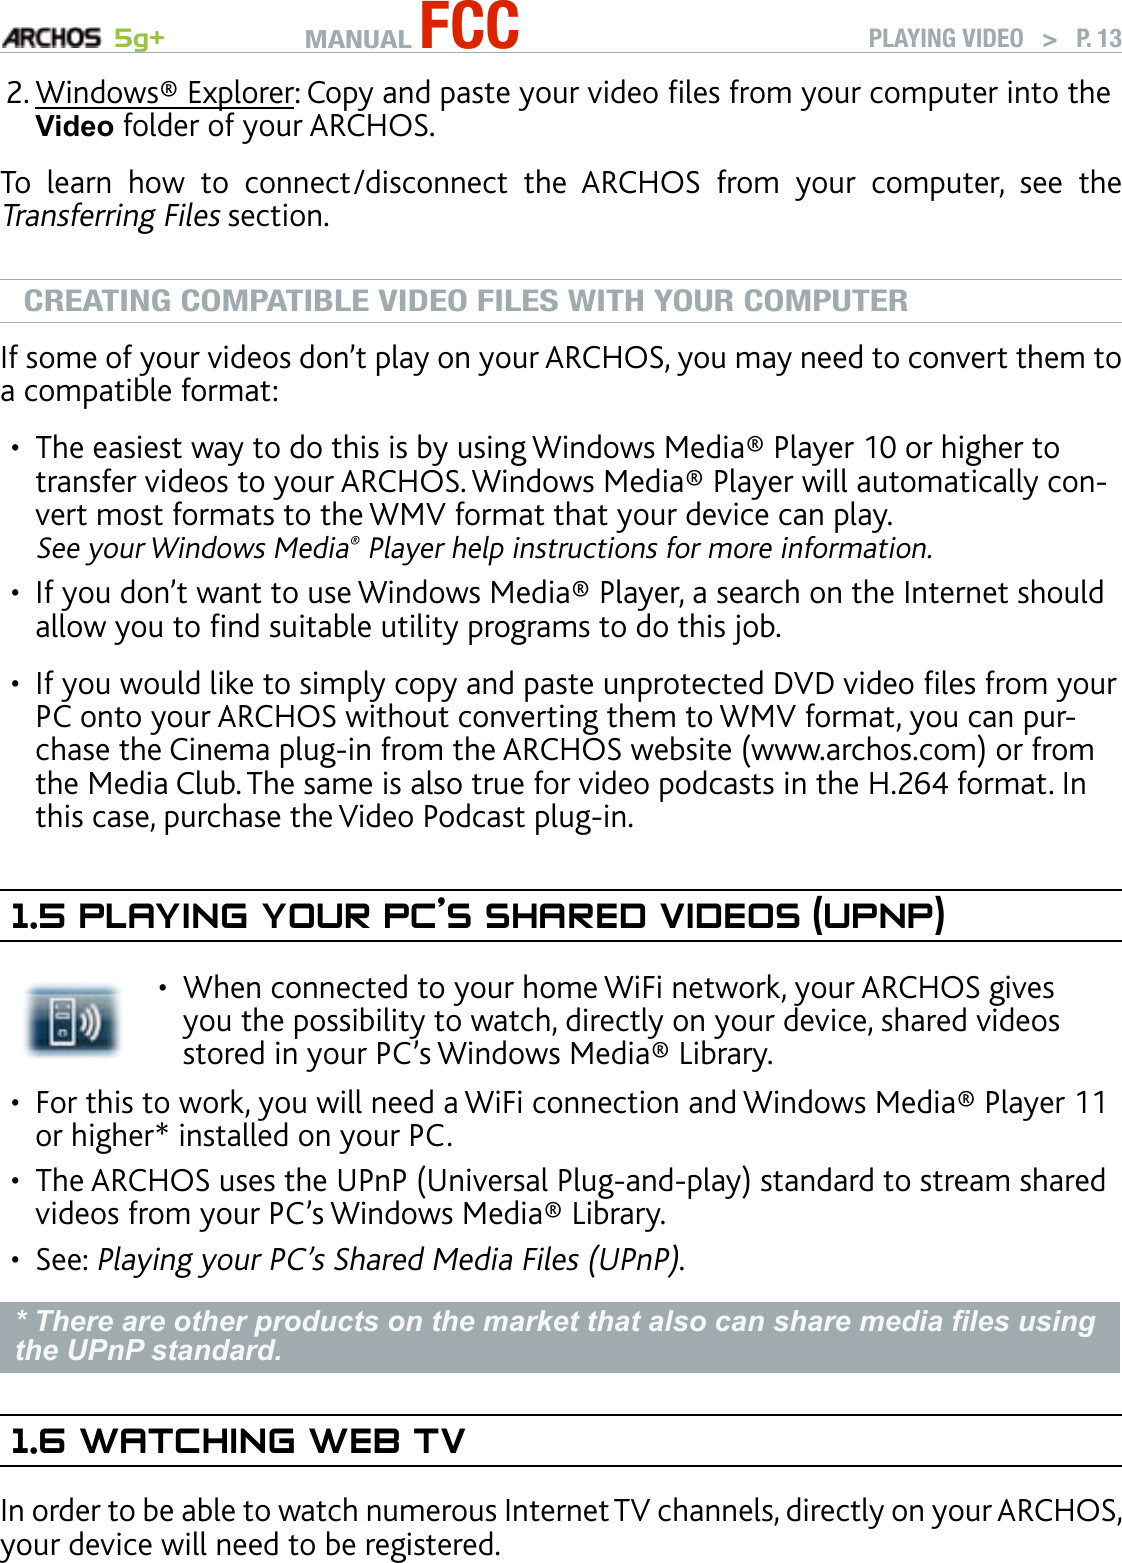 MANUAL FCC 5g+ PLAYING VIDEO   &gt;   P. 13Windows® Explorer: Copy and paste your video les from your computer into the Video folder of your ARCHOS.To  learn  how  to  connect/disconnect  the  ARCHOS  from  your  computer,  see  the Transferring Files section.CREATING COMPATIBLE VIDEO FILES WITH YOUR COMPUTERIf some of your videos don’t play on your ARCHOS, you may need to convert them to a compatible format:The easiest way to do this is by using Windows Media® Player 10 or higher to transfer videos to your ARCHOS. Windows Media® Player will automatically con-vert most formats to the WMV format that your device can play.  See your Windows Media® Player help instructions for more information.If you don’t want to use Windows Media® Player, a search on the Internet should allow you to nd suitable utility programs to do this job.If you would like to simply copy and paste unprotected DVD video les from your PC onto your ARCHOS without converting them to WMV format, you can pur-chase the Cinema plug-in from the ARCHOS website (www.archos.com) or from the Media Club. The same is also true for video podcasts in the H.264 format. In this case, purchase the Video Podcast plug-in.1.5 PlayIng yOur PC’s shared VIdeOs (uPnP)When connected to your home WiFi network, your ARCHOS gives you the possibility to watch, directly on your device, shared videos stored in your PC’s Windows Media® Library.•For this to work, you will need a WiFi connection and Windows Media® Player 11 or higher* installed on your PC.The ARCHOS uses the UPnP (Universal Plug-and-play) standard to stream shared videos from your PC’s Windows Media® Library.See: Playing your PC’s Shared Media Files (UPnP). * There are other products on the market that also can share media les using the UPnP standard.1.6 waTChIng web TVIn order to be able to watch numerous Internet TV channels, directly on your ARCHOS, your device will need to be registered.2.••••••